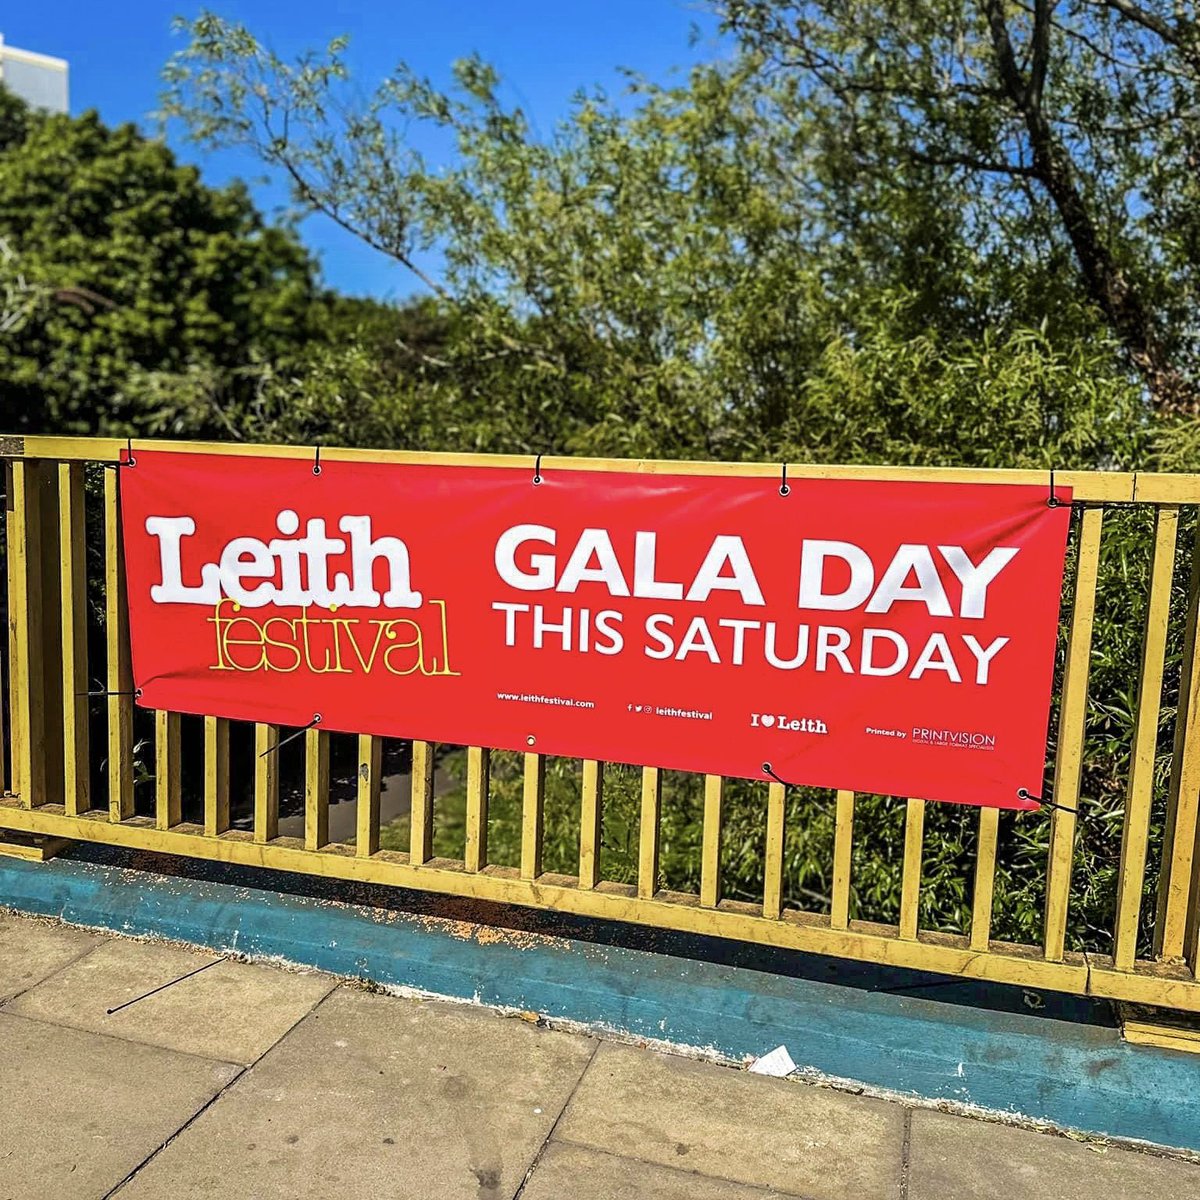 day 10th June 2023 @ Leith Links 10am-5pm #leithfestival2023 #galaday #communityfirst #livemusic #hotfood #coldfood #fitness #science #parkour #charity #localbusinesses #kidsfun #circusskillsworkshops #dancers #storytelling #familyfunday #dogshow #drumcircle #meditationstation